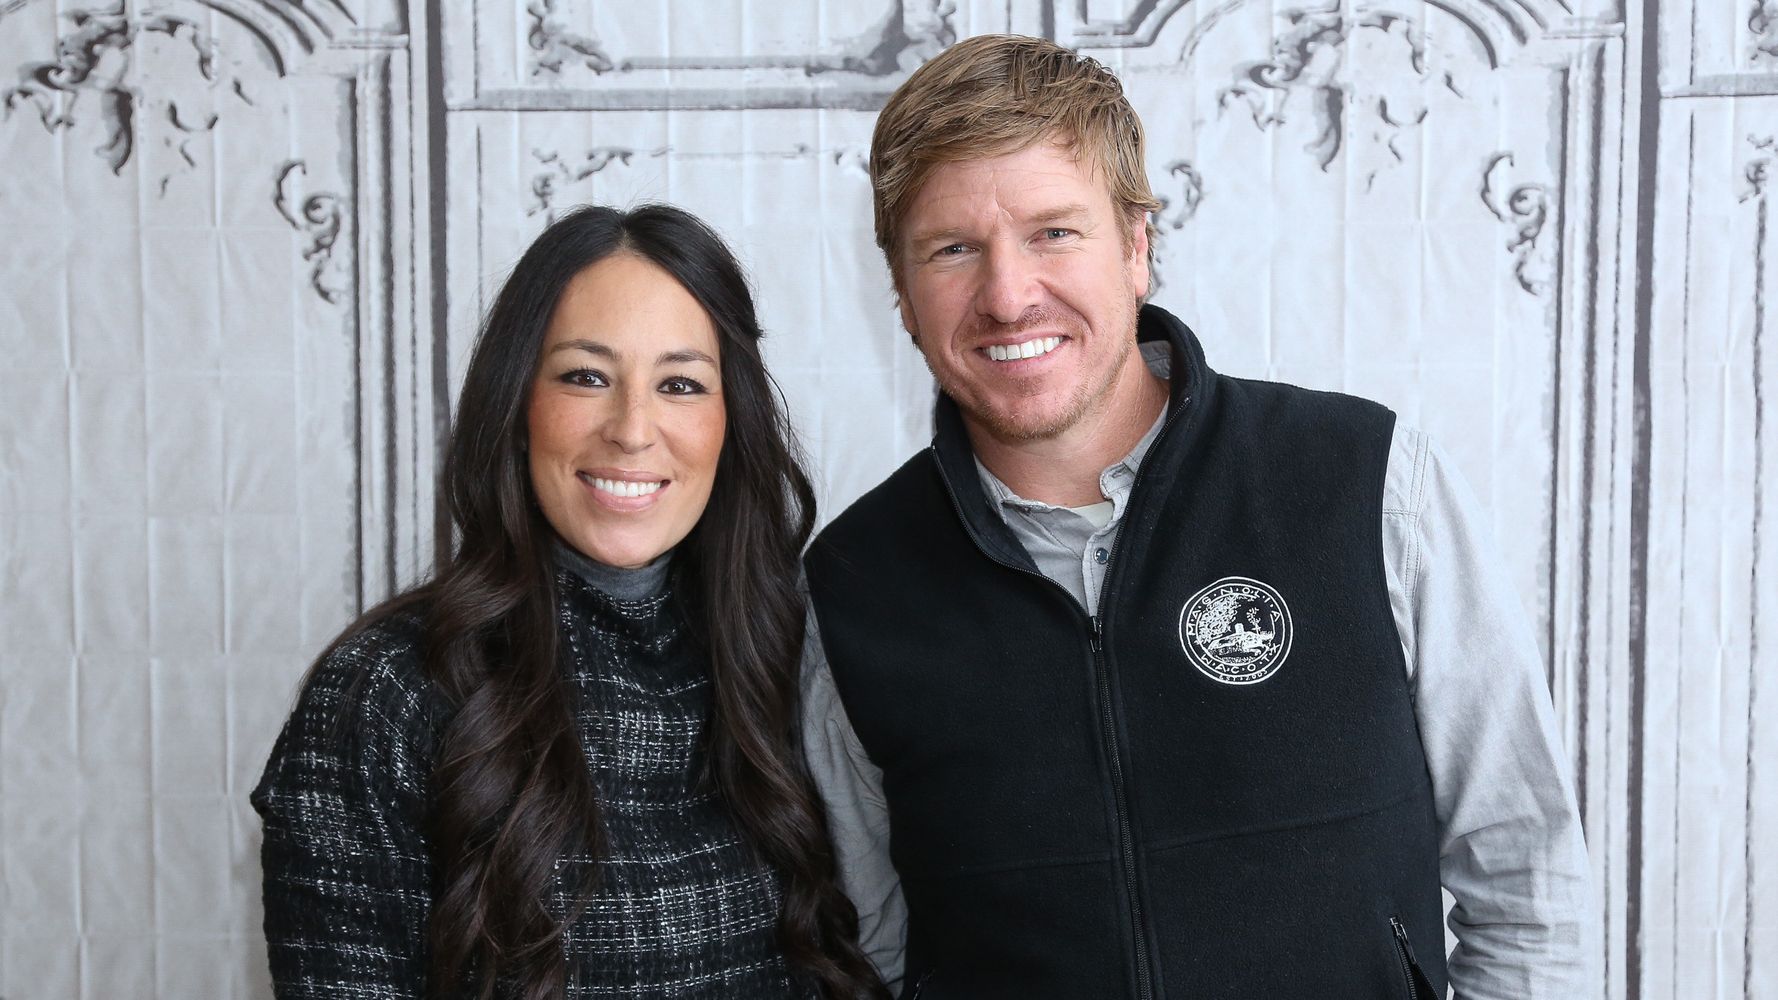 HGTV Shows Give Viewers Unrealistic Idea of Renovations Cost